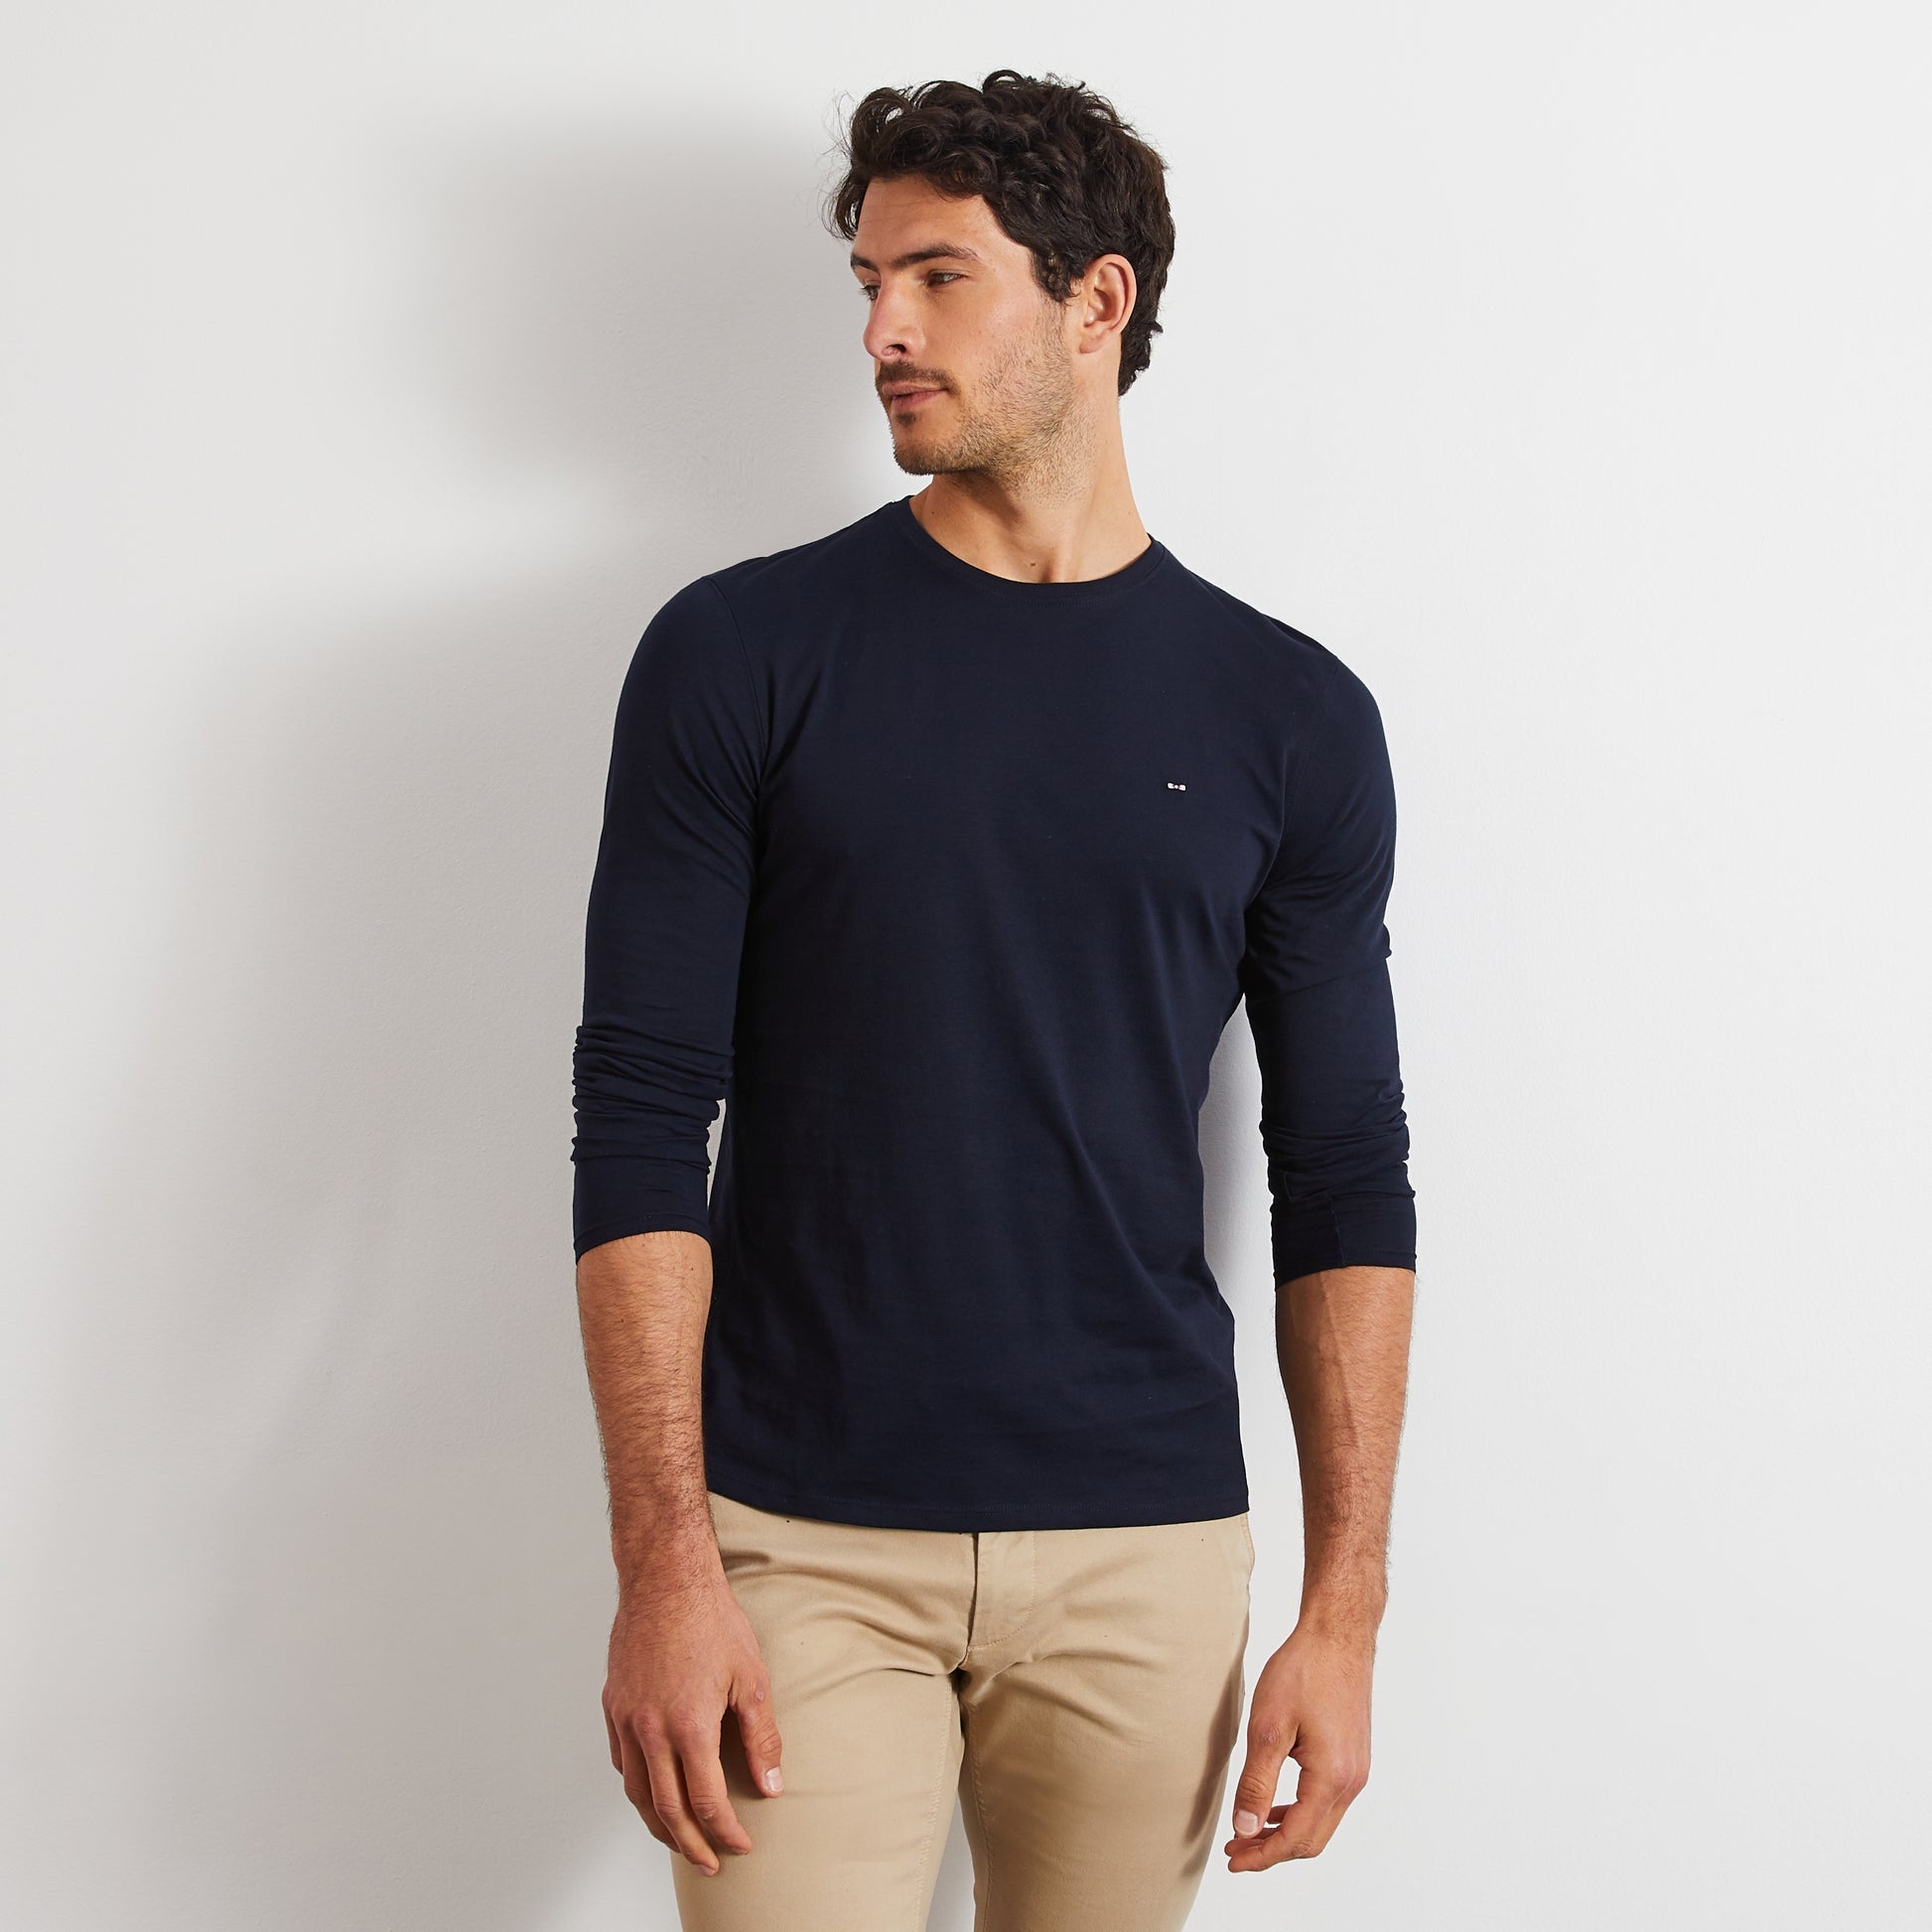 Long Sleeved Navy Blue Cotton T-Shirt_PPKNITLE0007_BLF_03